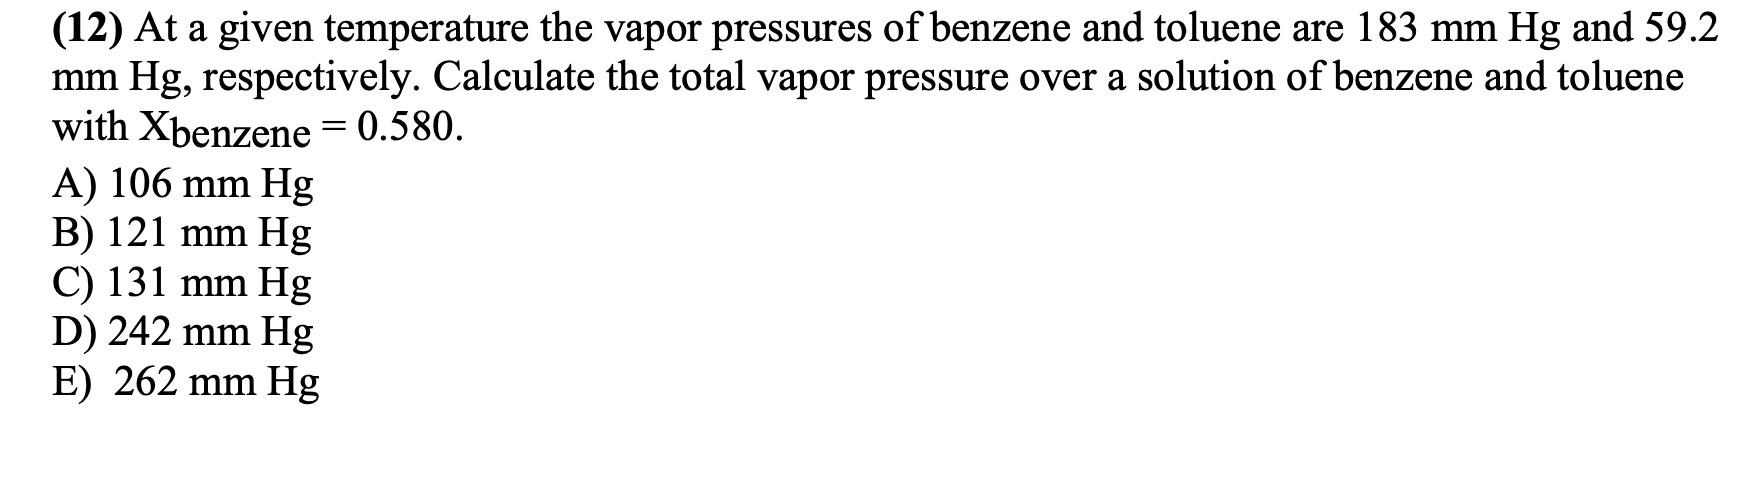 (12) At a given temperature the vapor pressures of benzene and toluene are 183 mm Hg and 59.2
mm Hg, respectively. Calculate the total vapor pressure over a solution of benzene and toluene
with Xbenzene = 0.580.
A) 106 mm Hg
B) 121 mm Hg
C) 131 mm Hg
D) 242 mm Hg
E) 262 mm Hg
